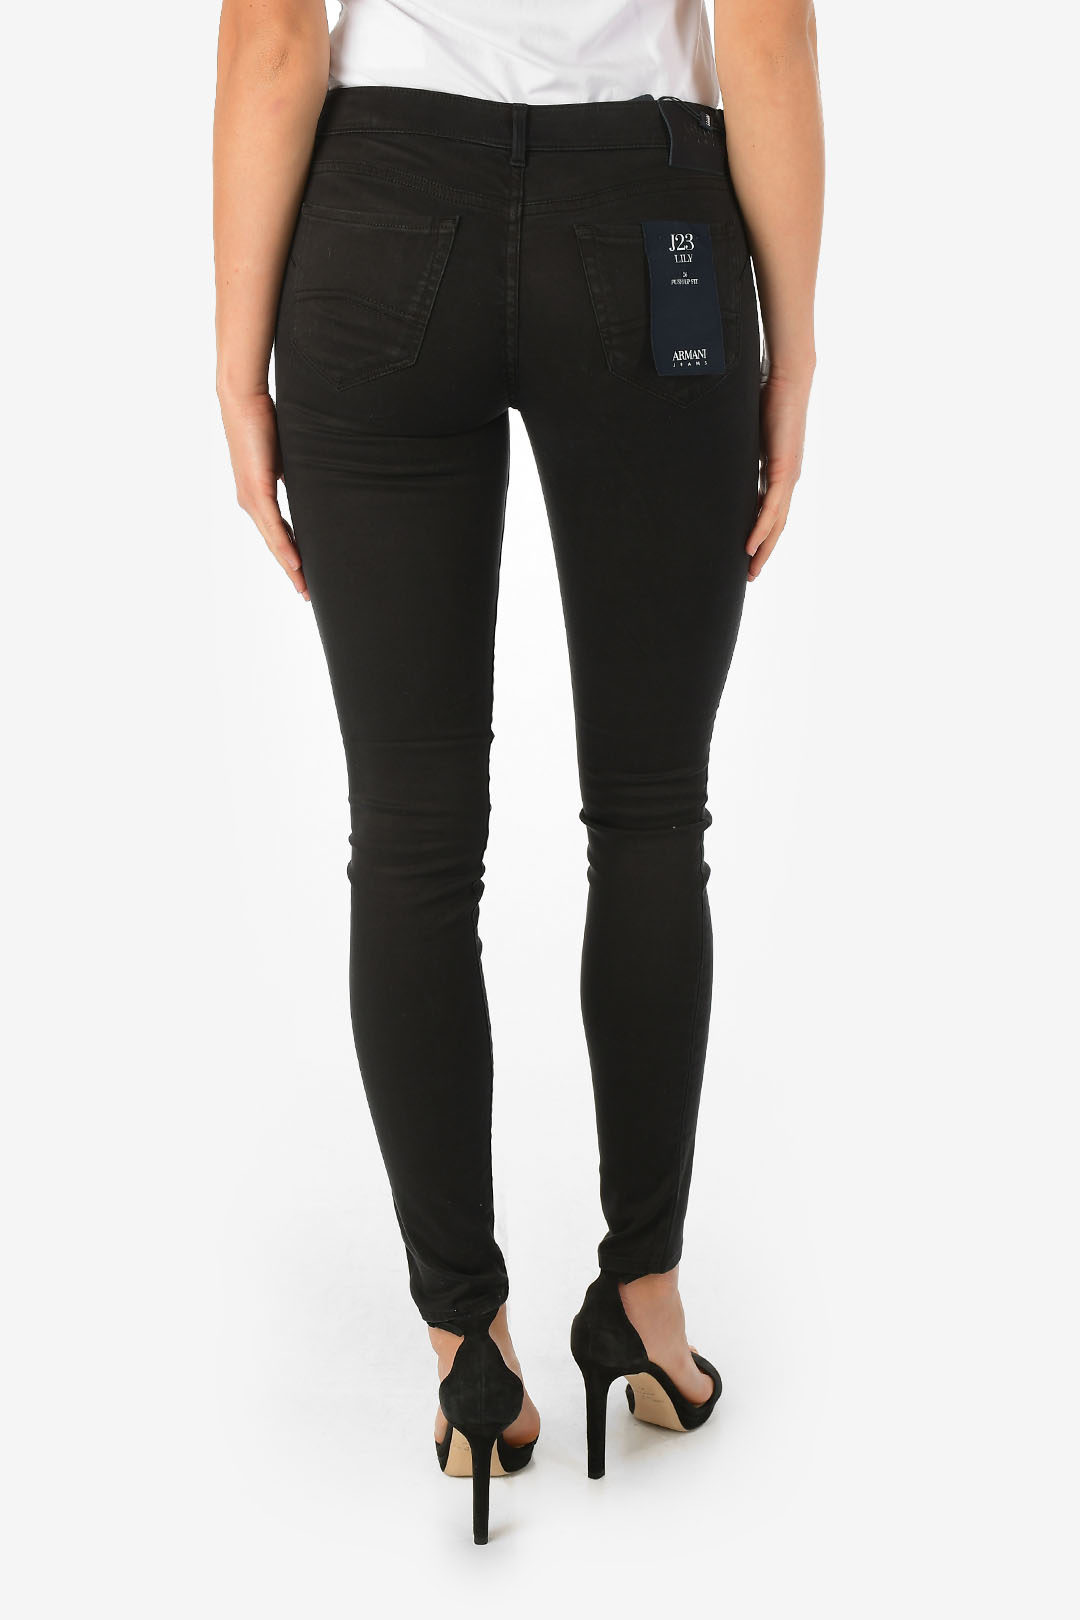 Armani ARMANI JEANS Push Up Fit J23 LILY Jeans women - Glamood Outlet